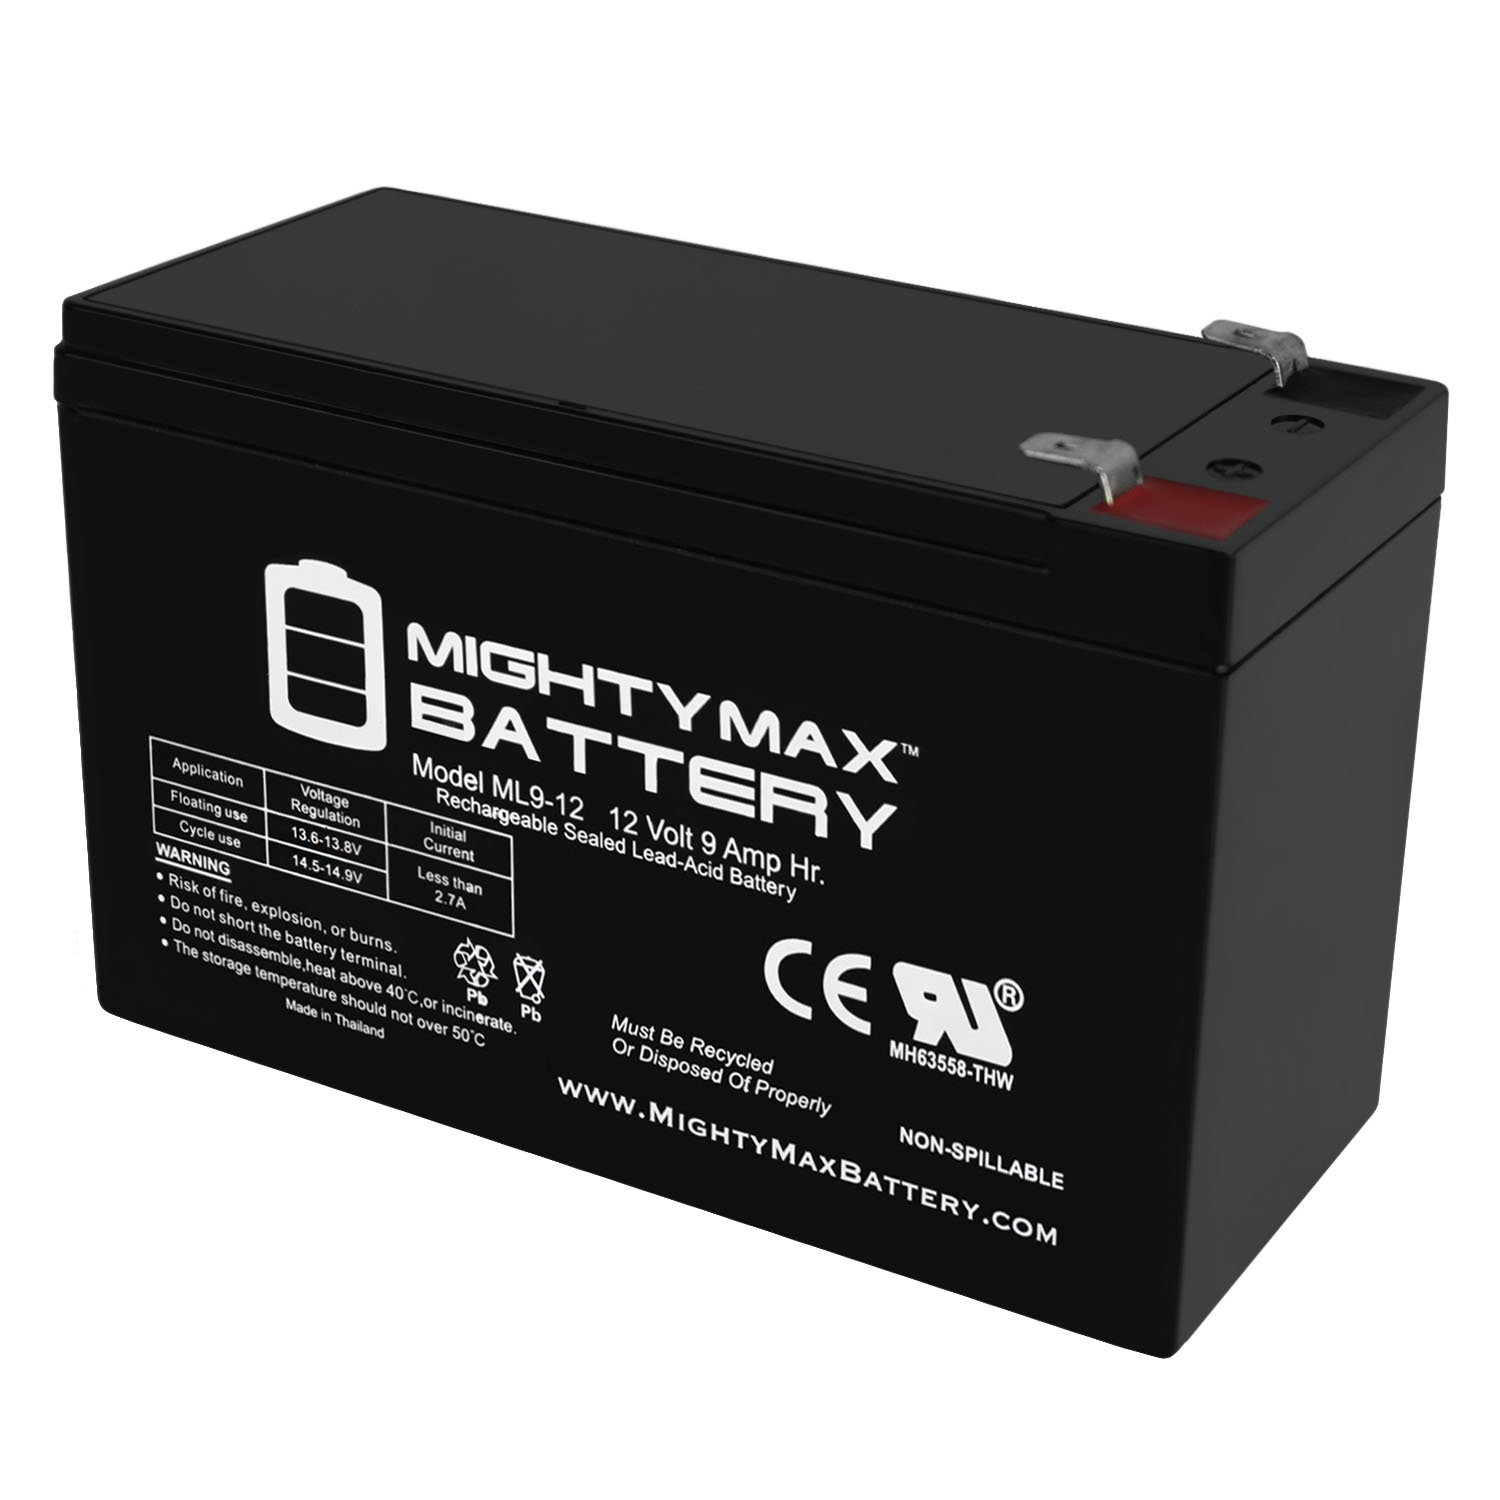 Mighty Max Battery Ml9-12 12 V 9 Ah Rechargeable SLA Battery